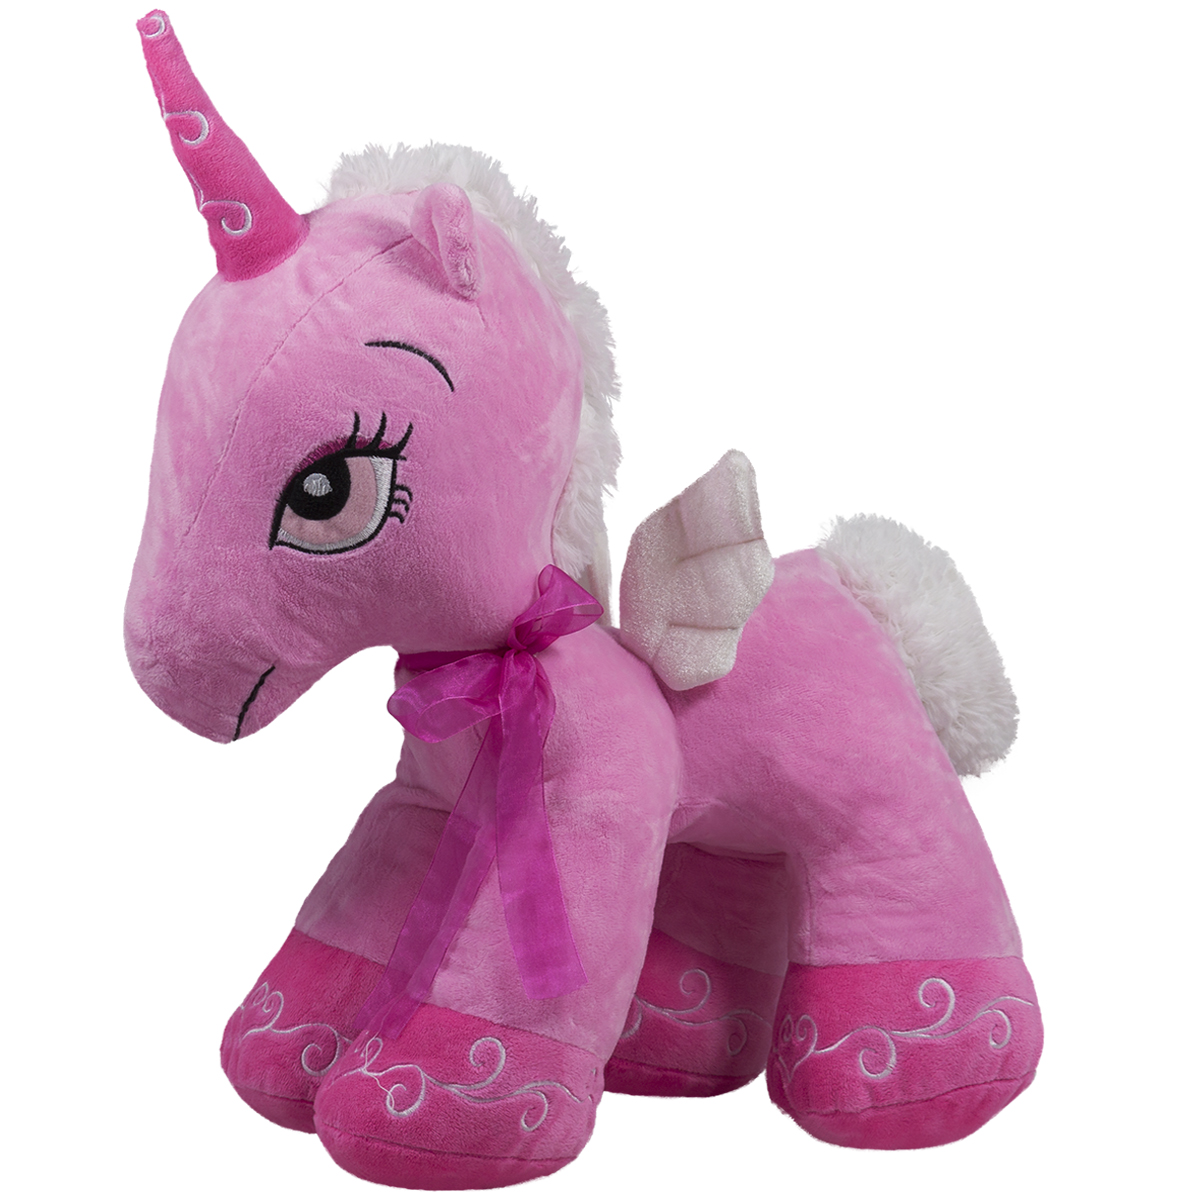 Unicorn with accessories - Pink